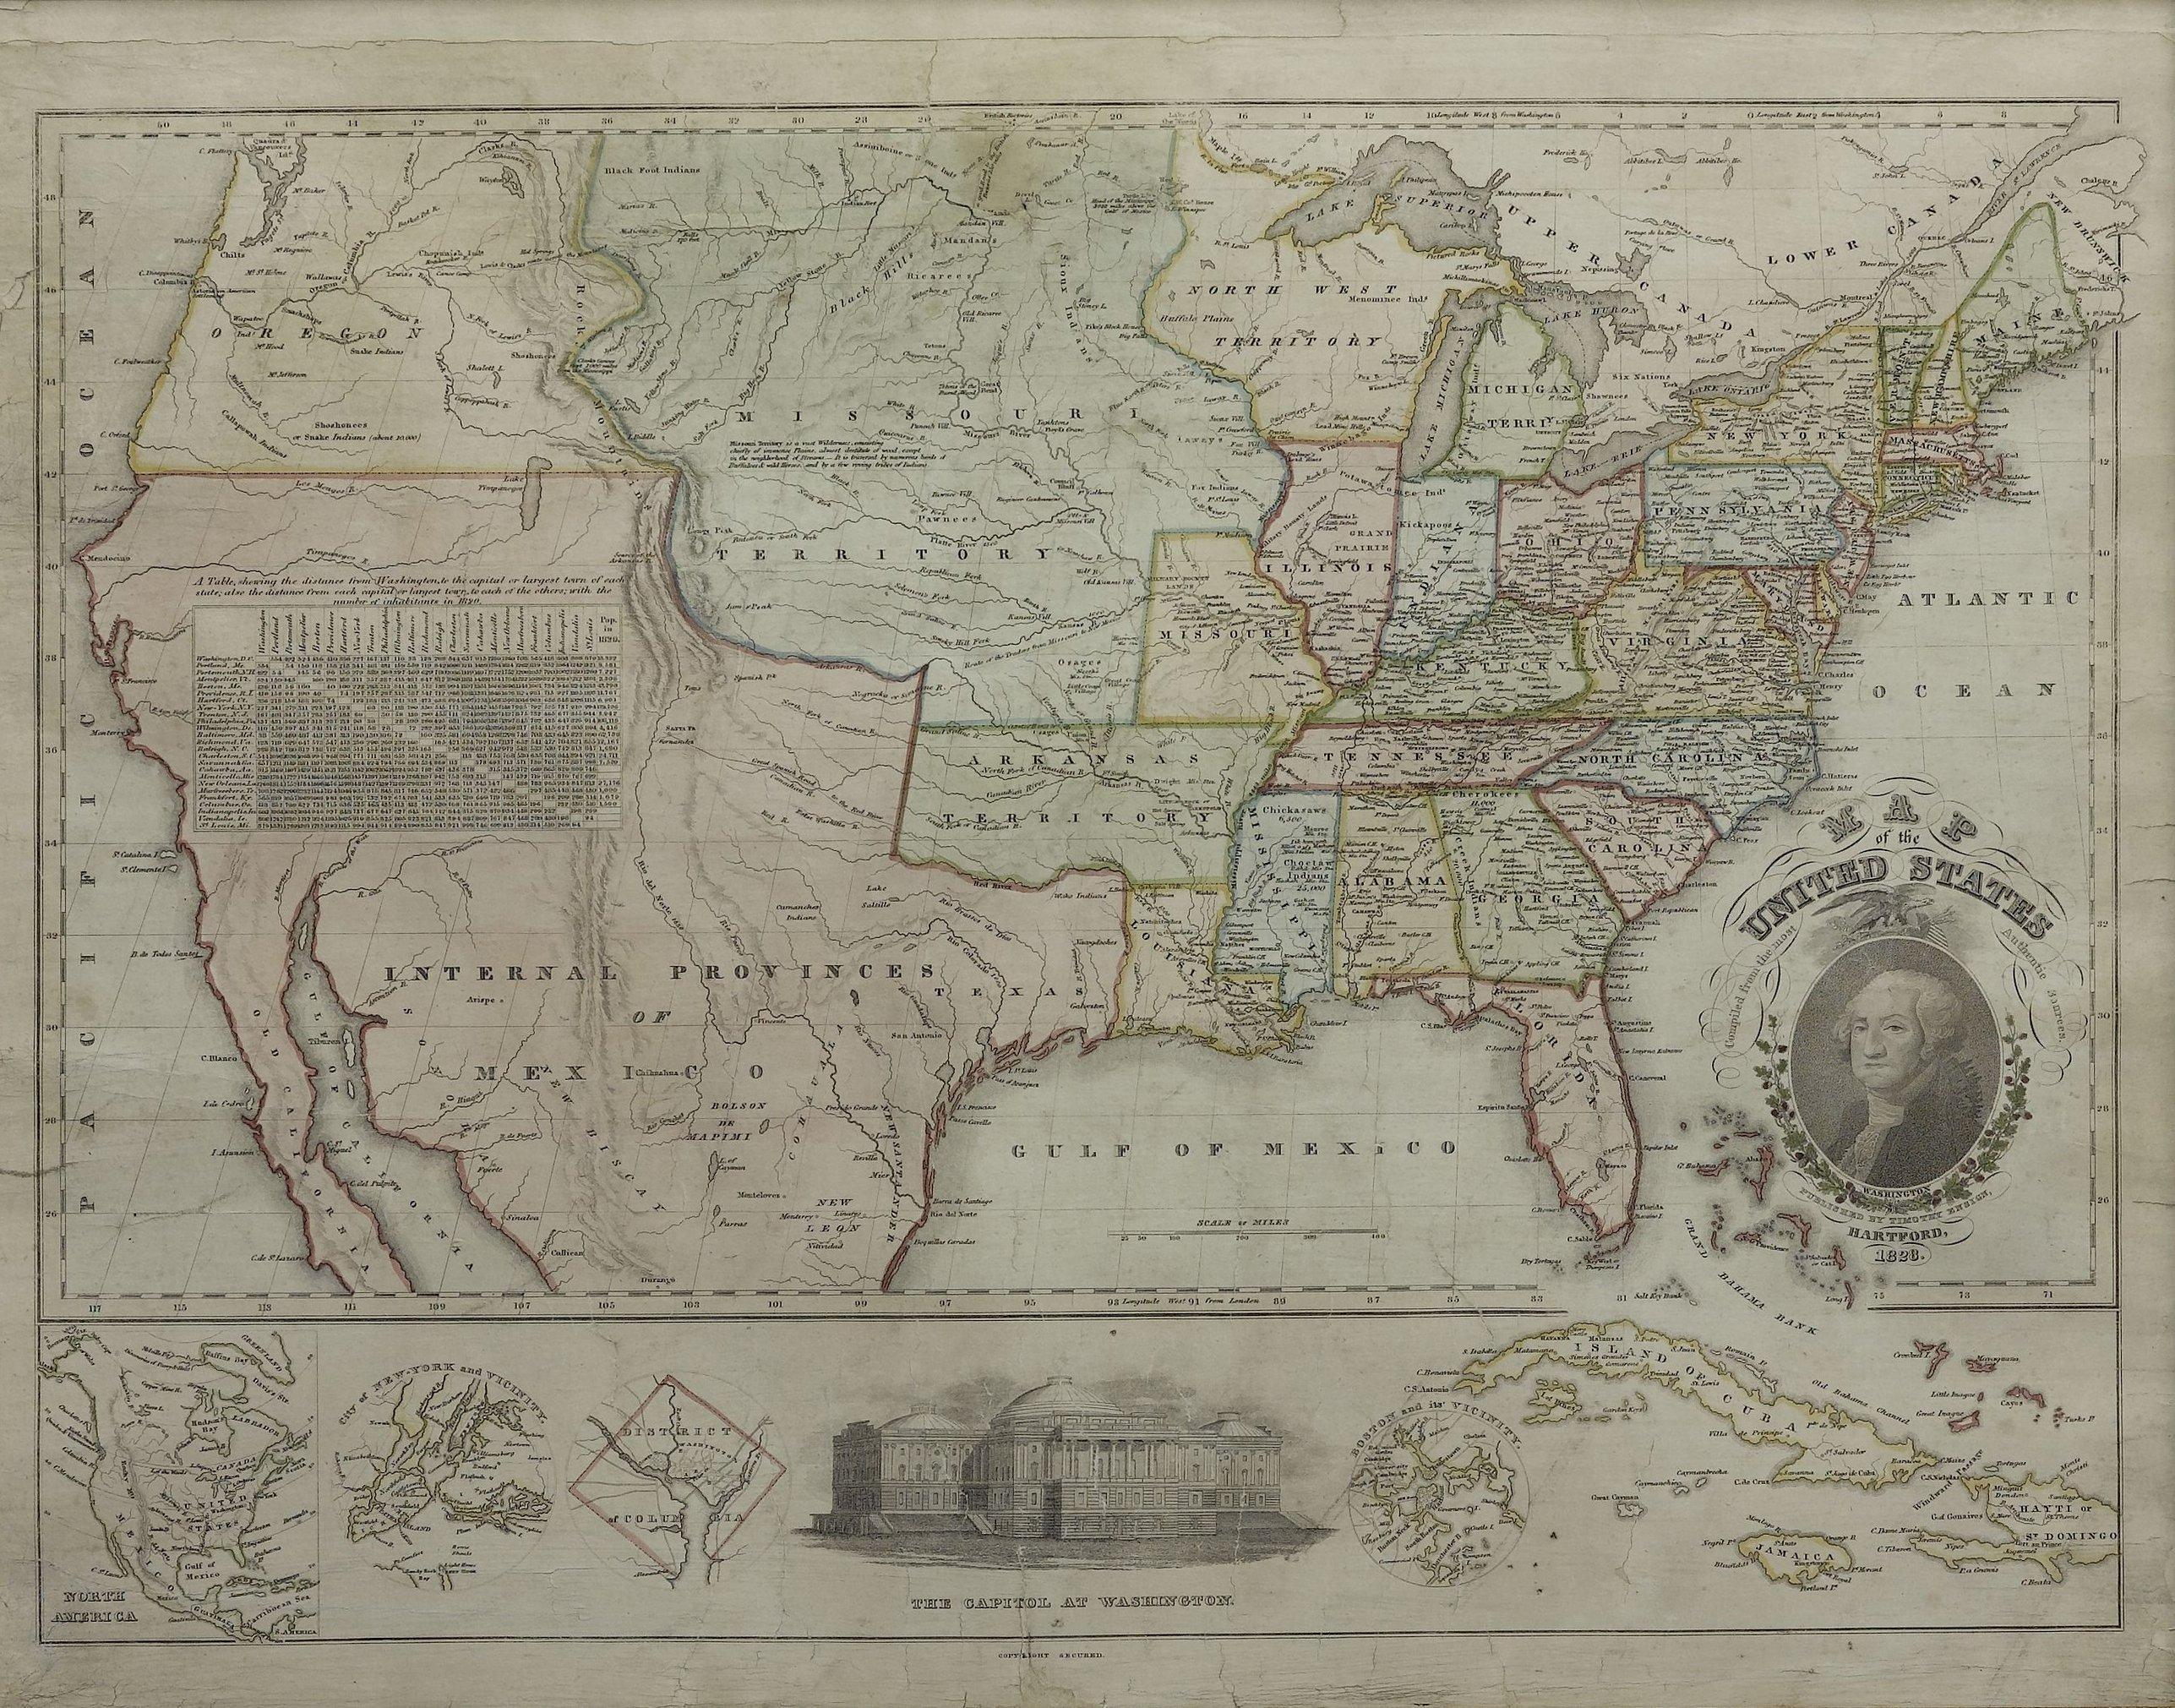 Presented is Timothy Ensign’s “Map of the United States,” published in 1828. The map is one of the first to show the United States stretching all the way to the Pacific Ocean. The map’s area covers Oregon to the Atlantic Ocean and Canada to Mexico.